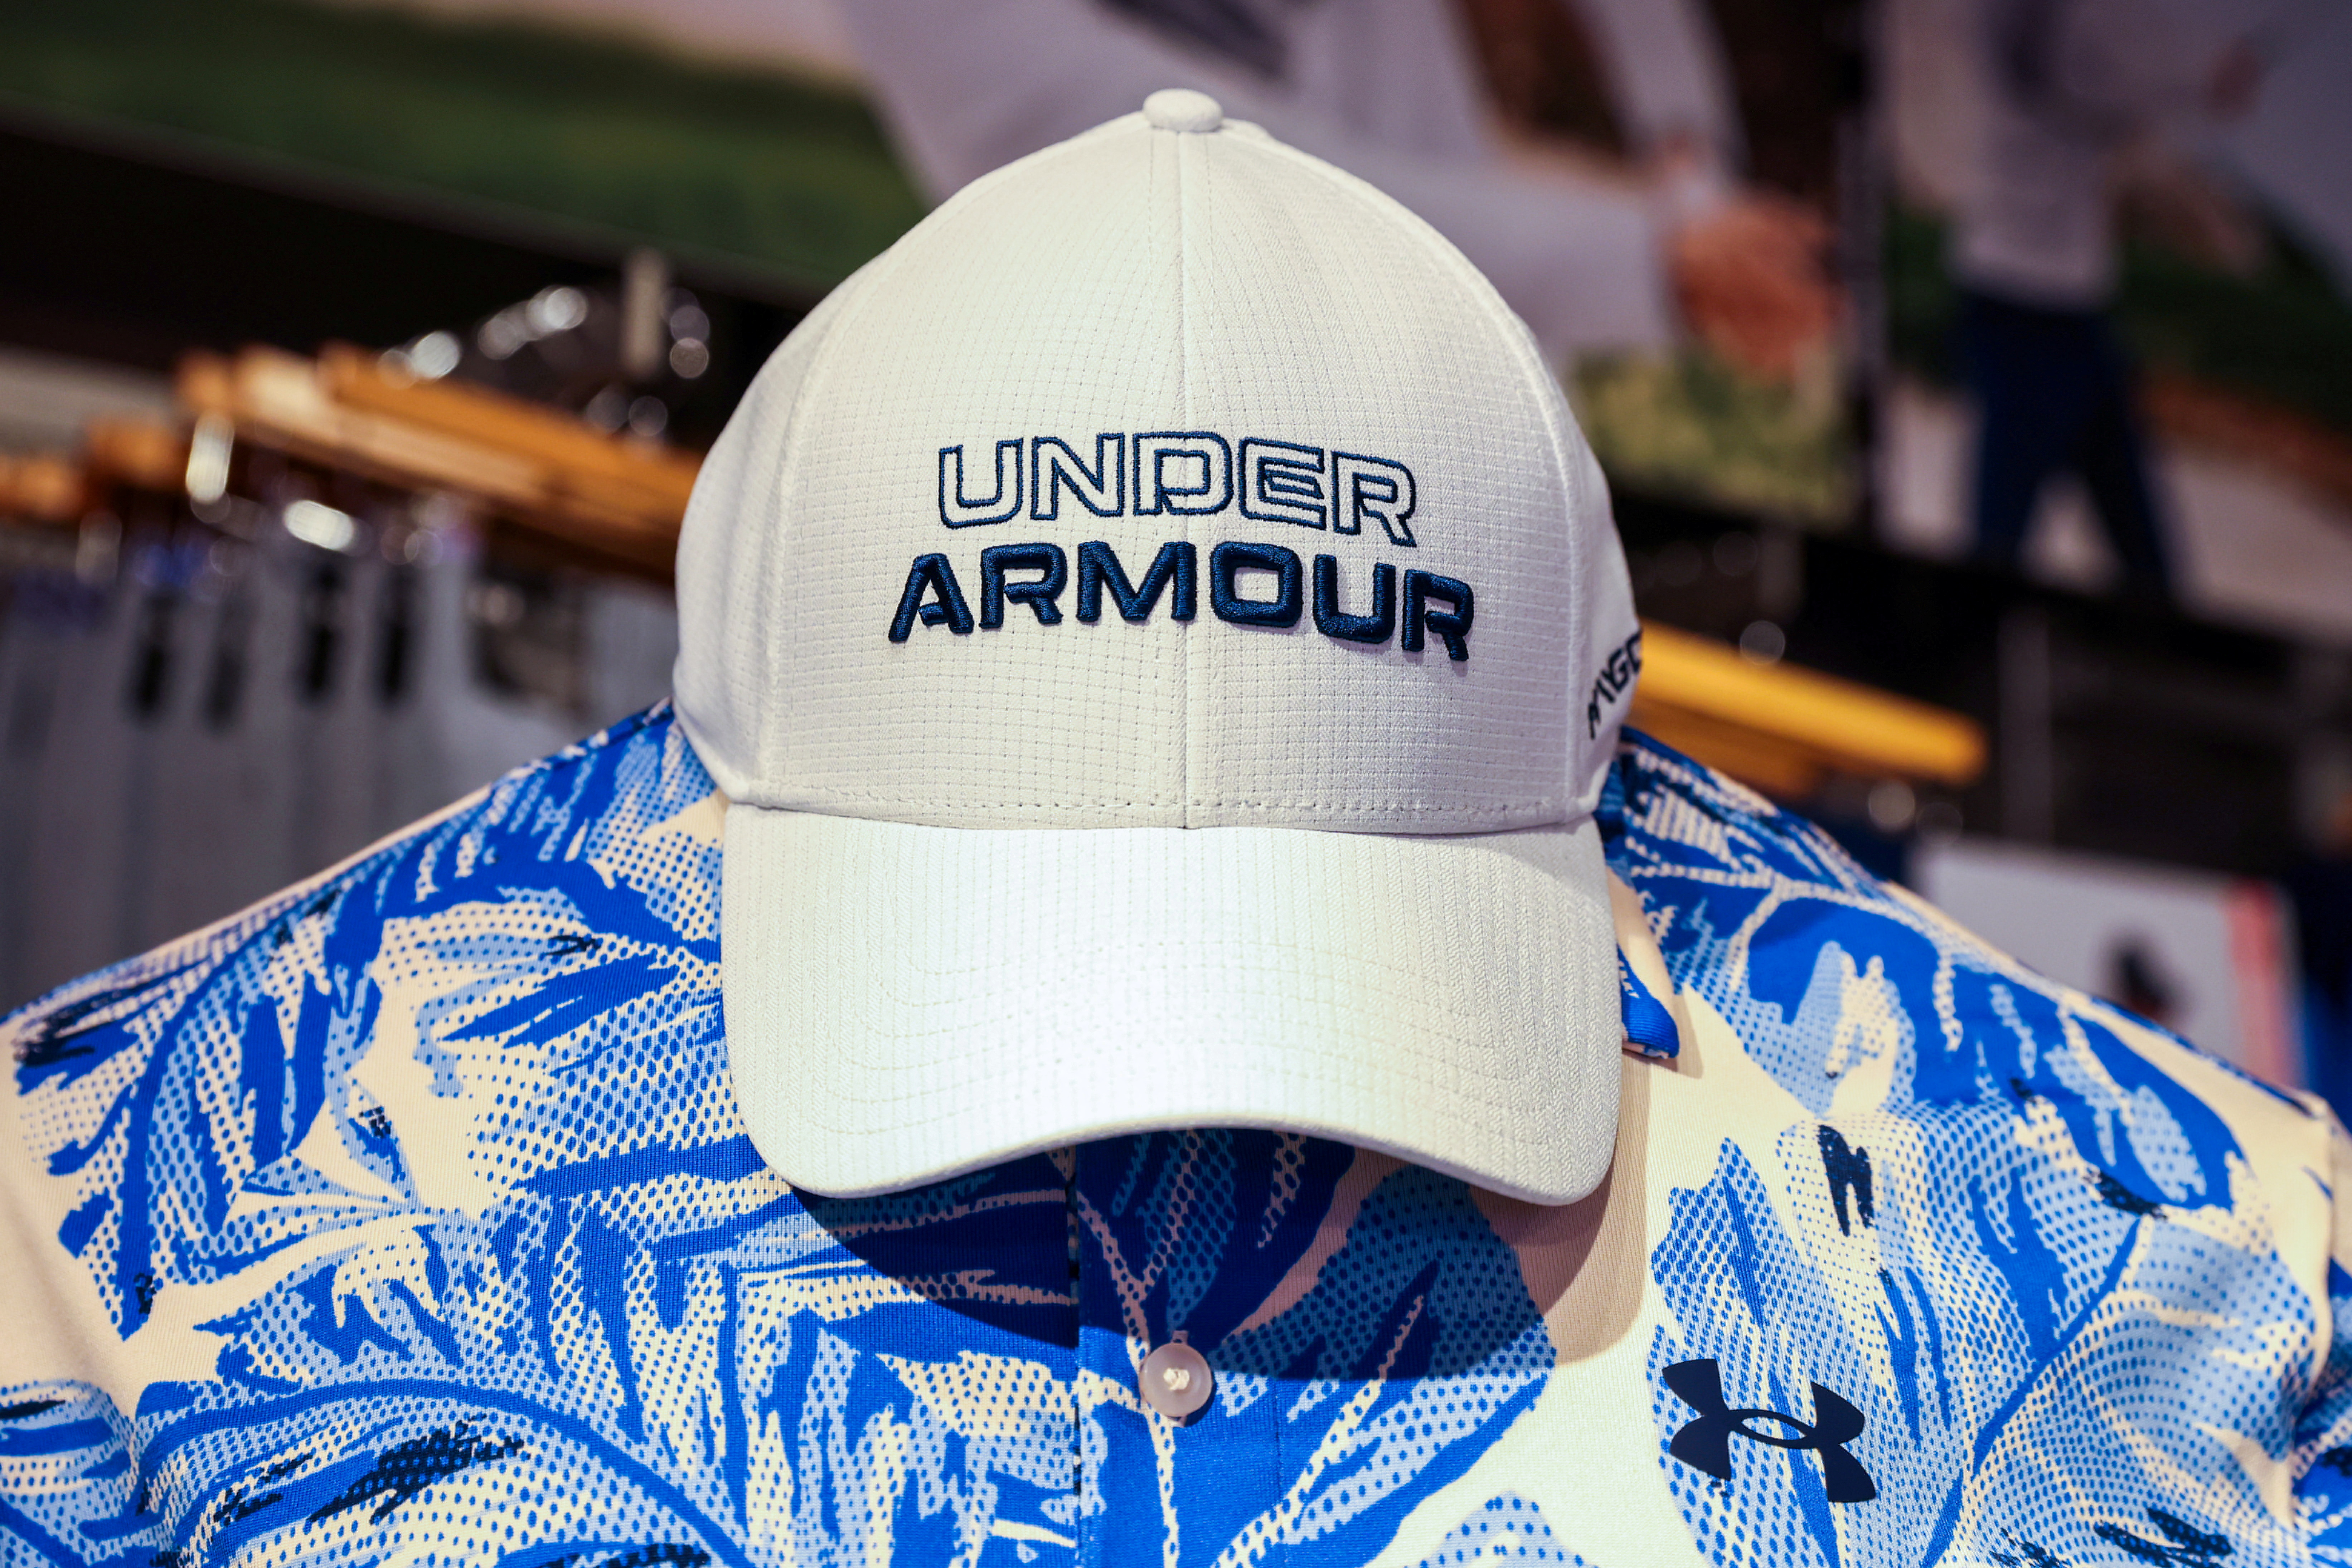 Under Armour cuts forecasts on weak demand, higher discounts | Reuters